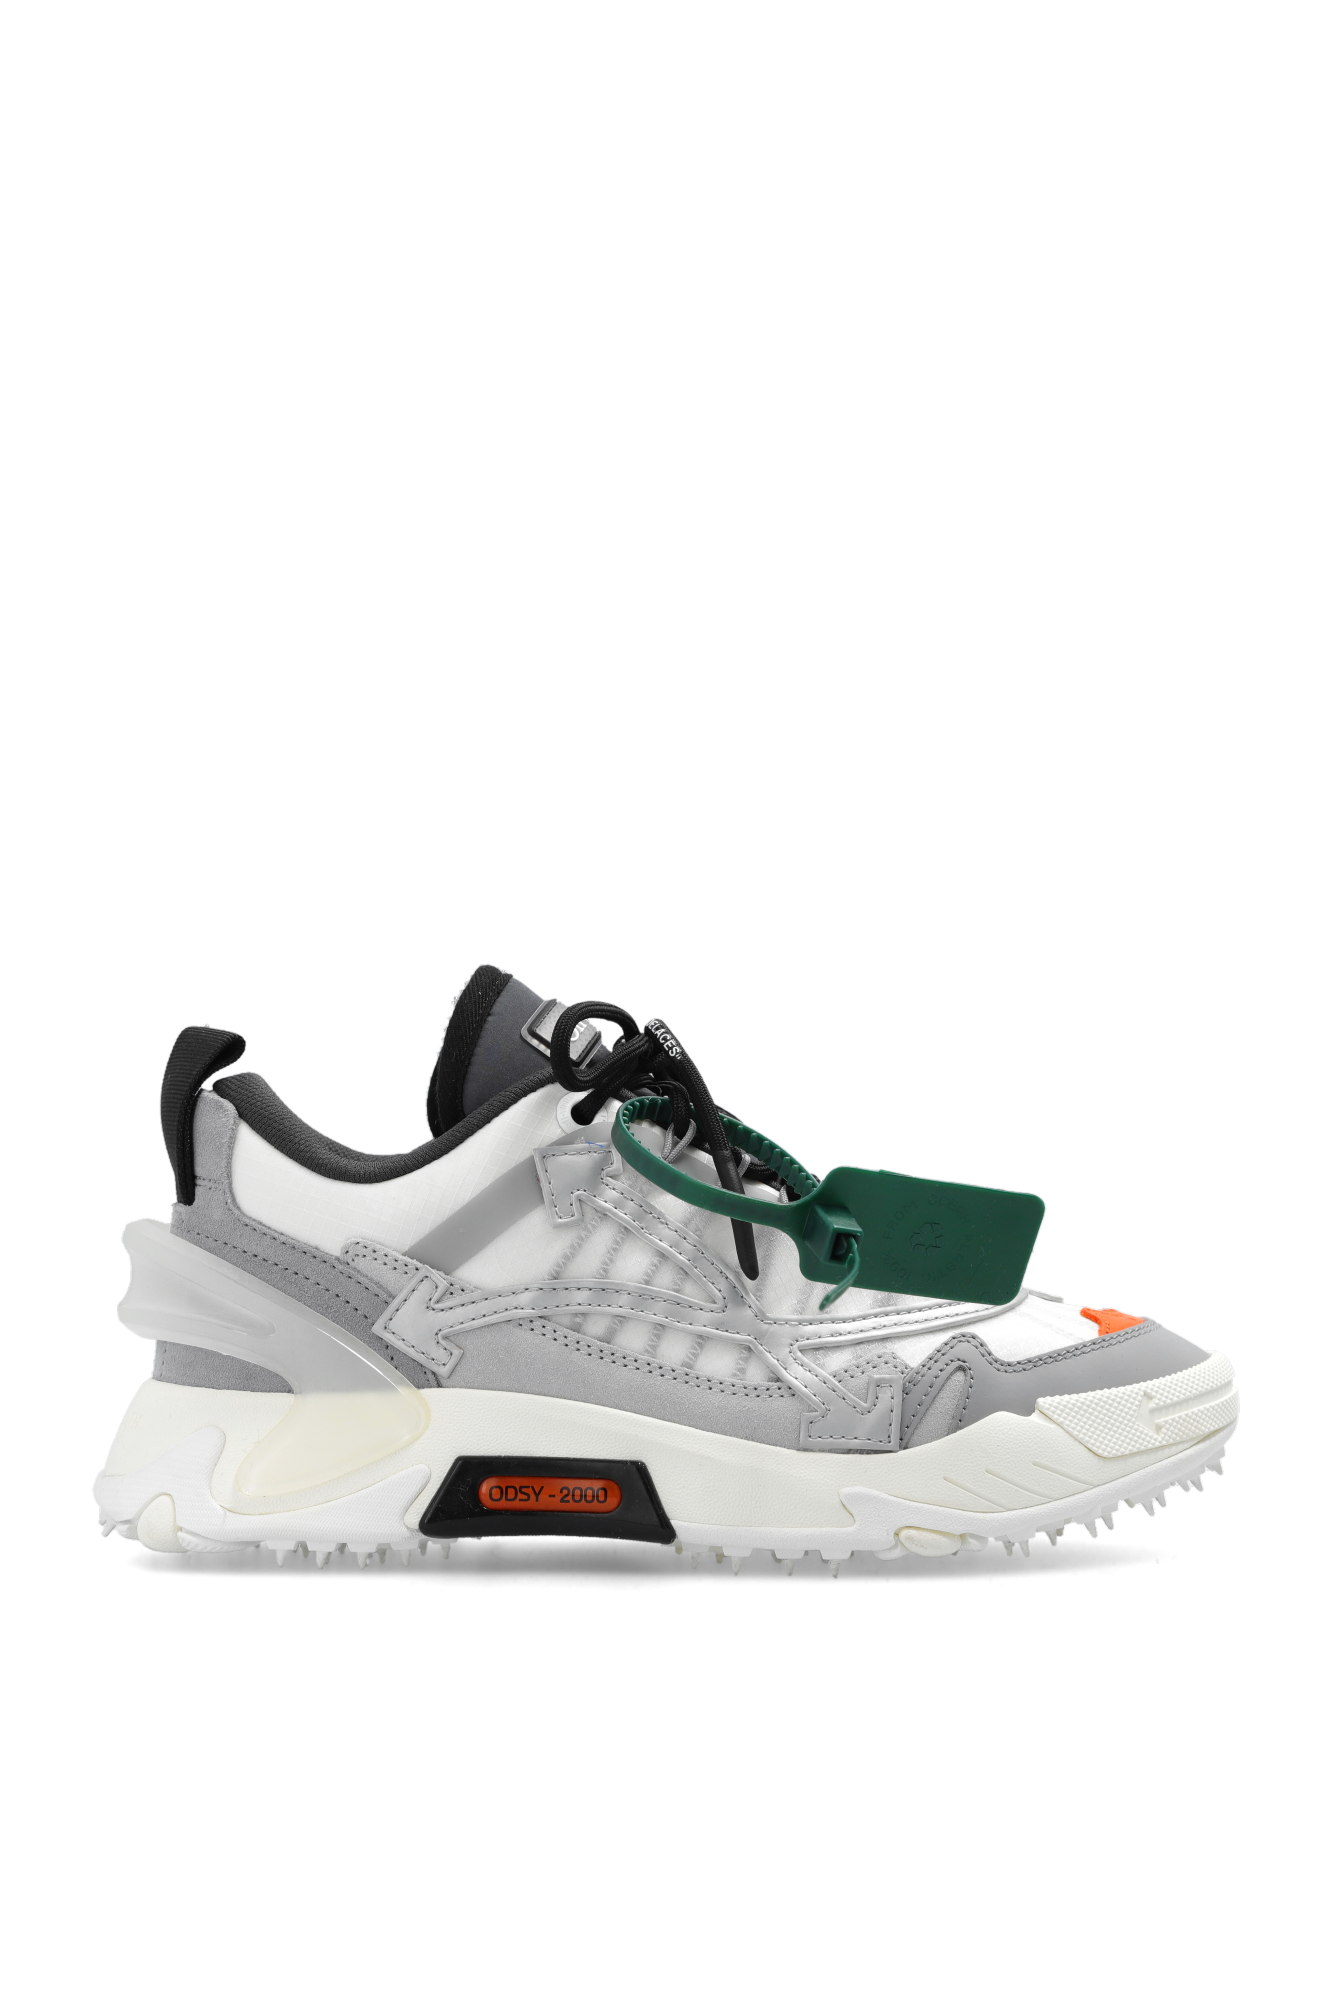 Off-White ‘Odsy 2000’ sneakers | Women's Shoes | Vitkac